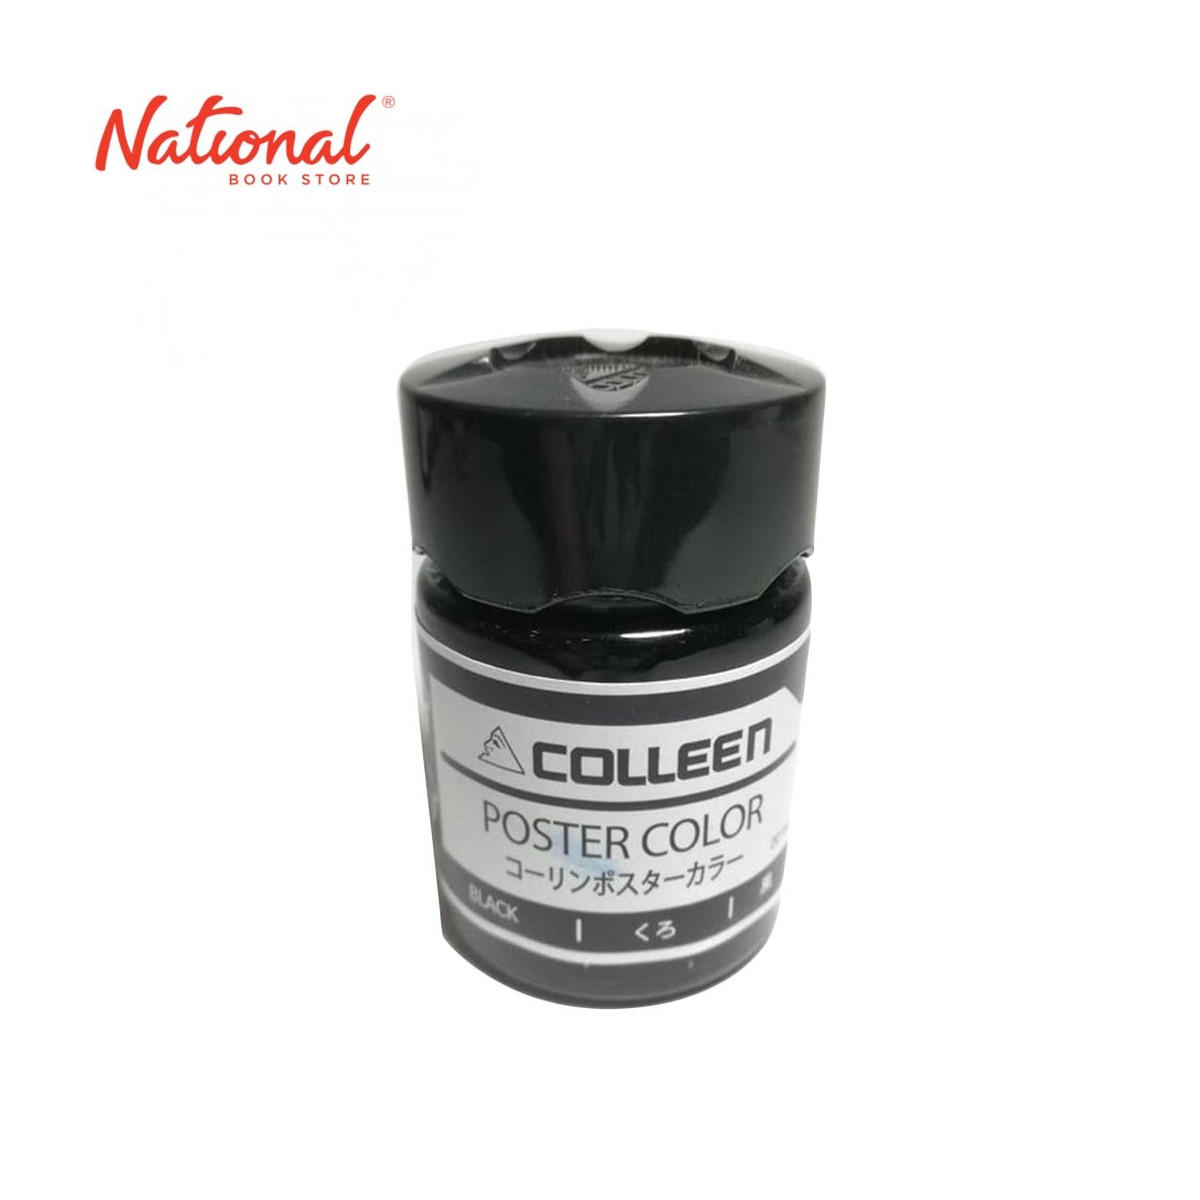 COLLEEN POSTER COLOR 12001 20ML, 12001 BLACK